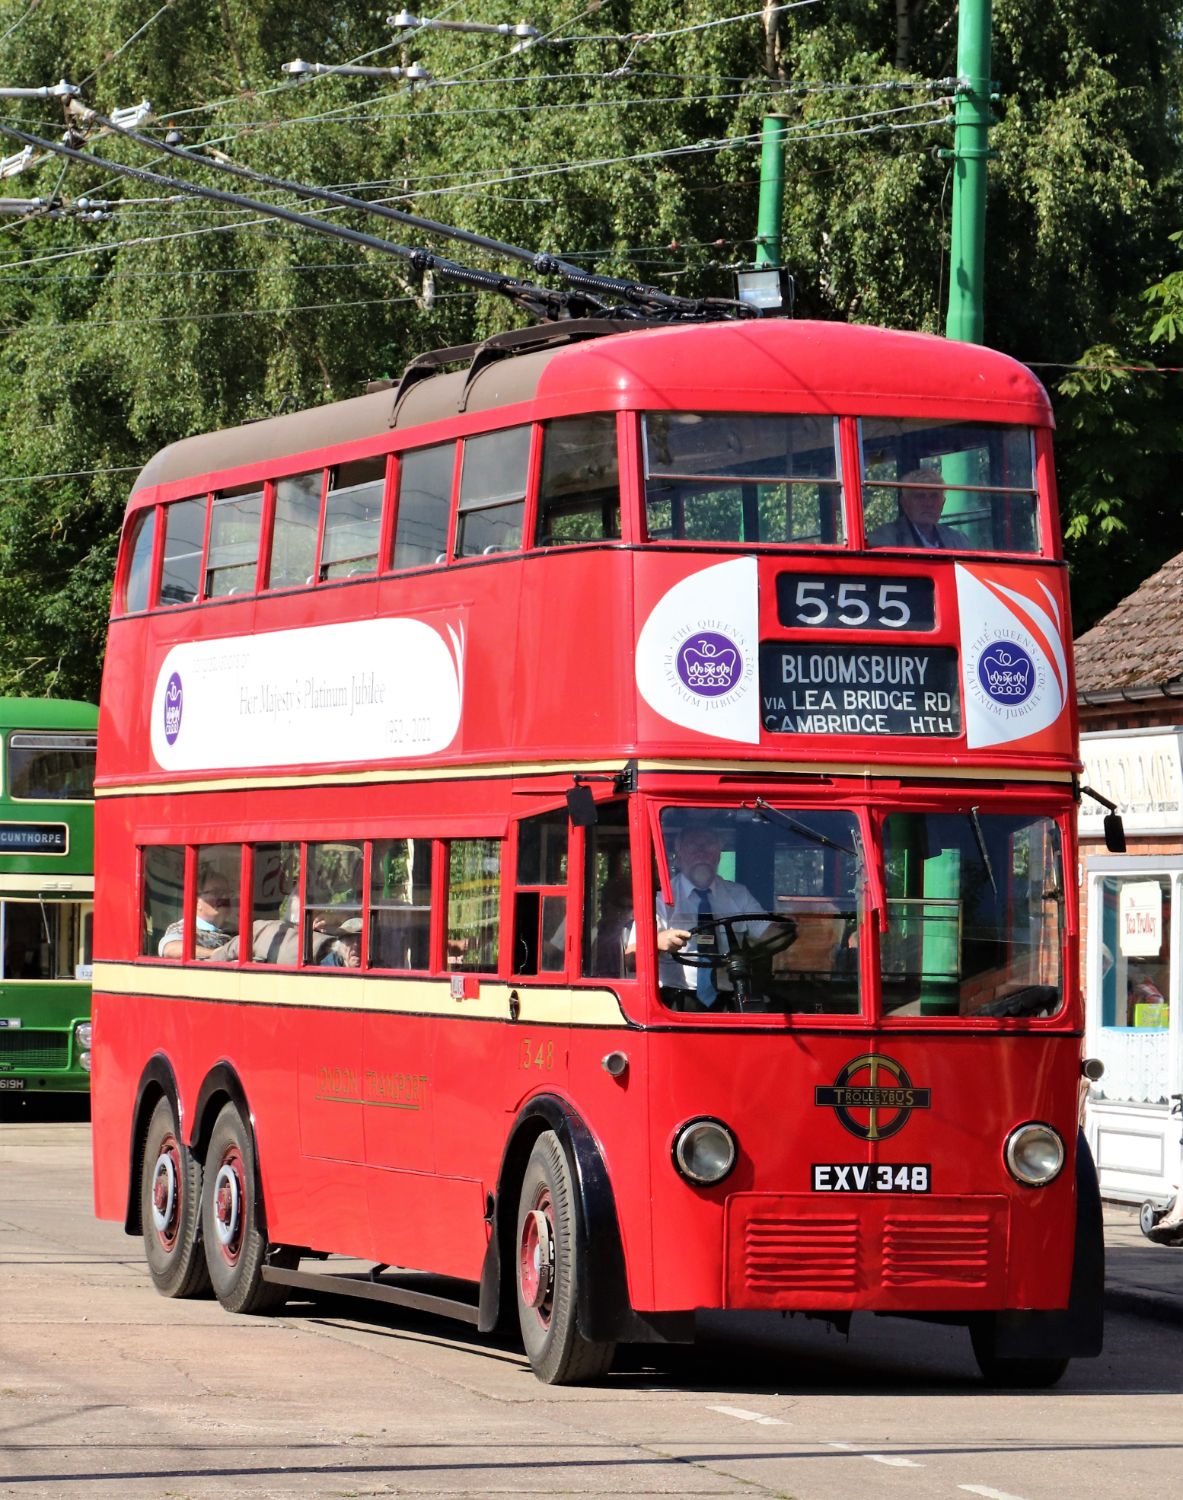 After withdrawal in July 1961, this London K2 type trolleybus spent many years in Ireland with the Transport Museum Society of Dublin before eventually finding its way to Sandtoft. Built by Leyland with a MetroVick motor and English Electric controllers, it had entered service in October 1938